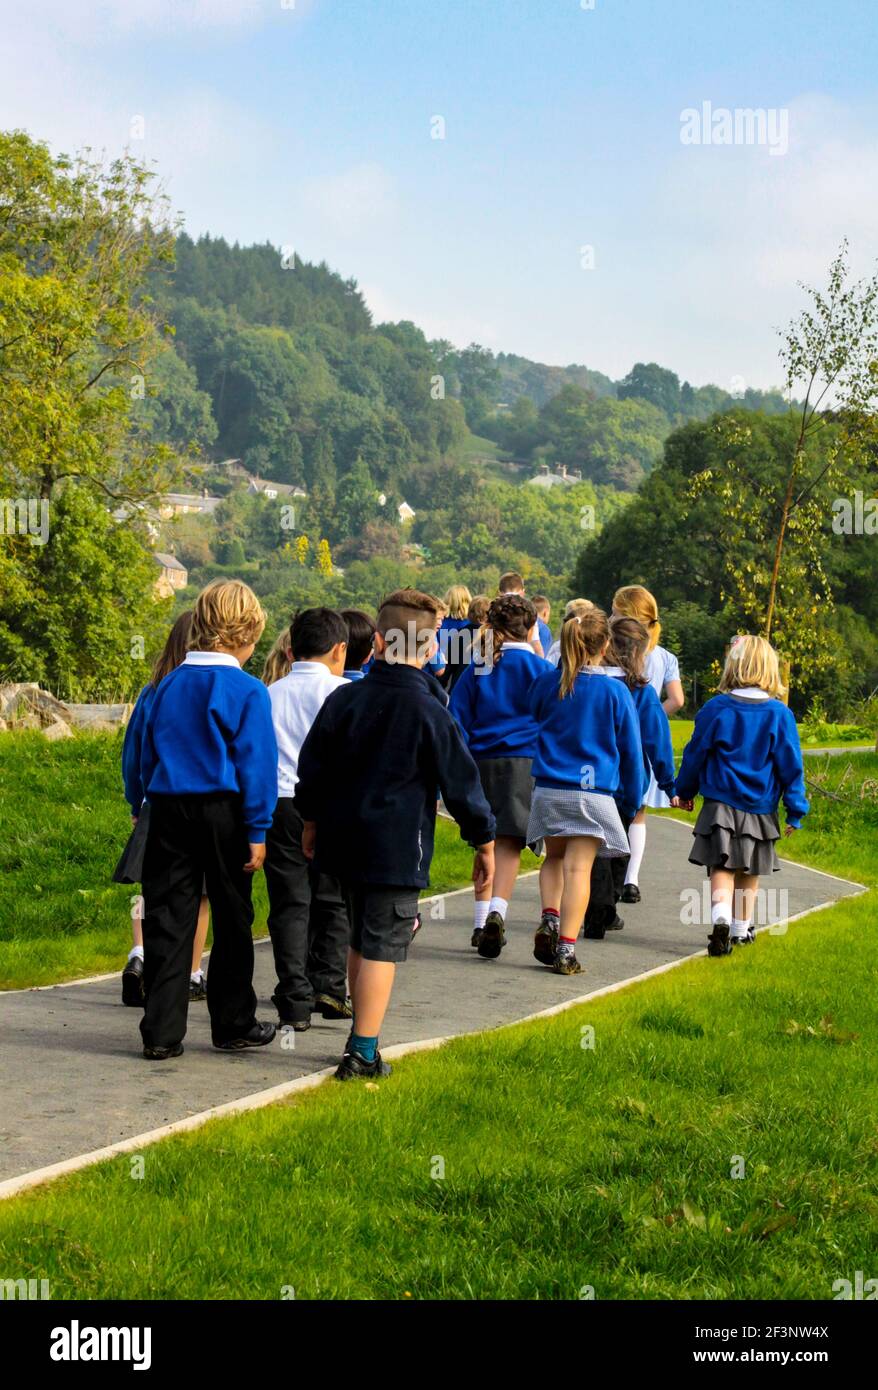 Group of primary school children in school uniform making their way back to the classroom after a break in the lessons. Stock Photo